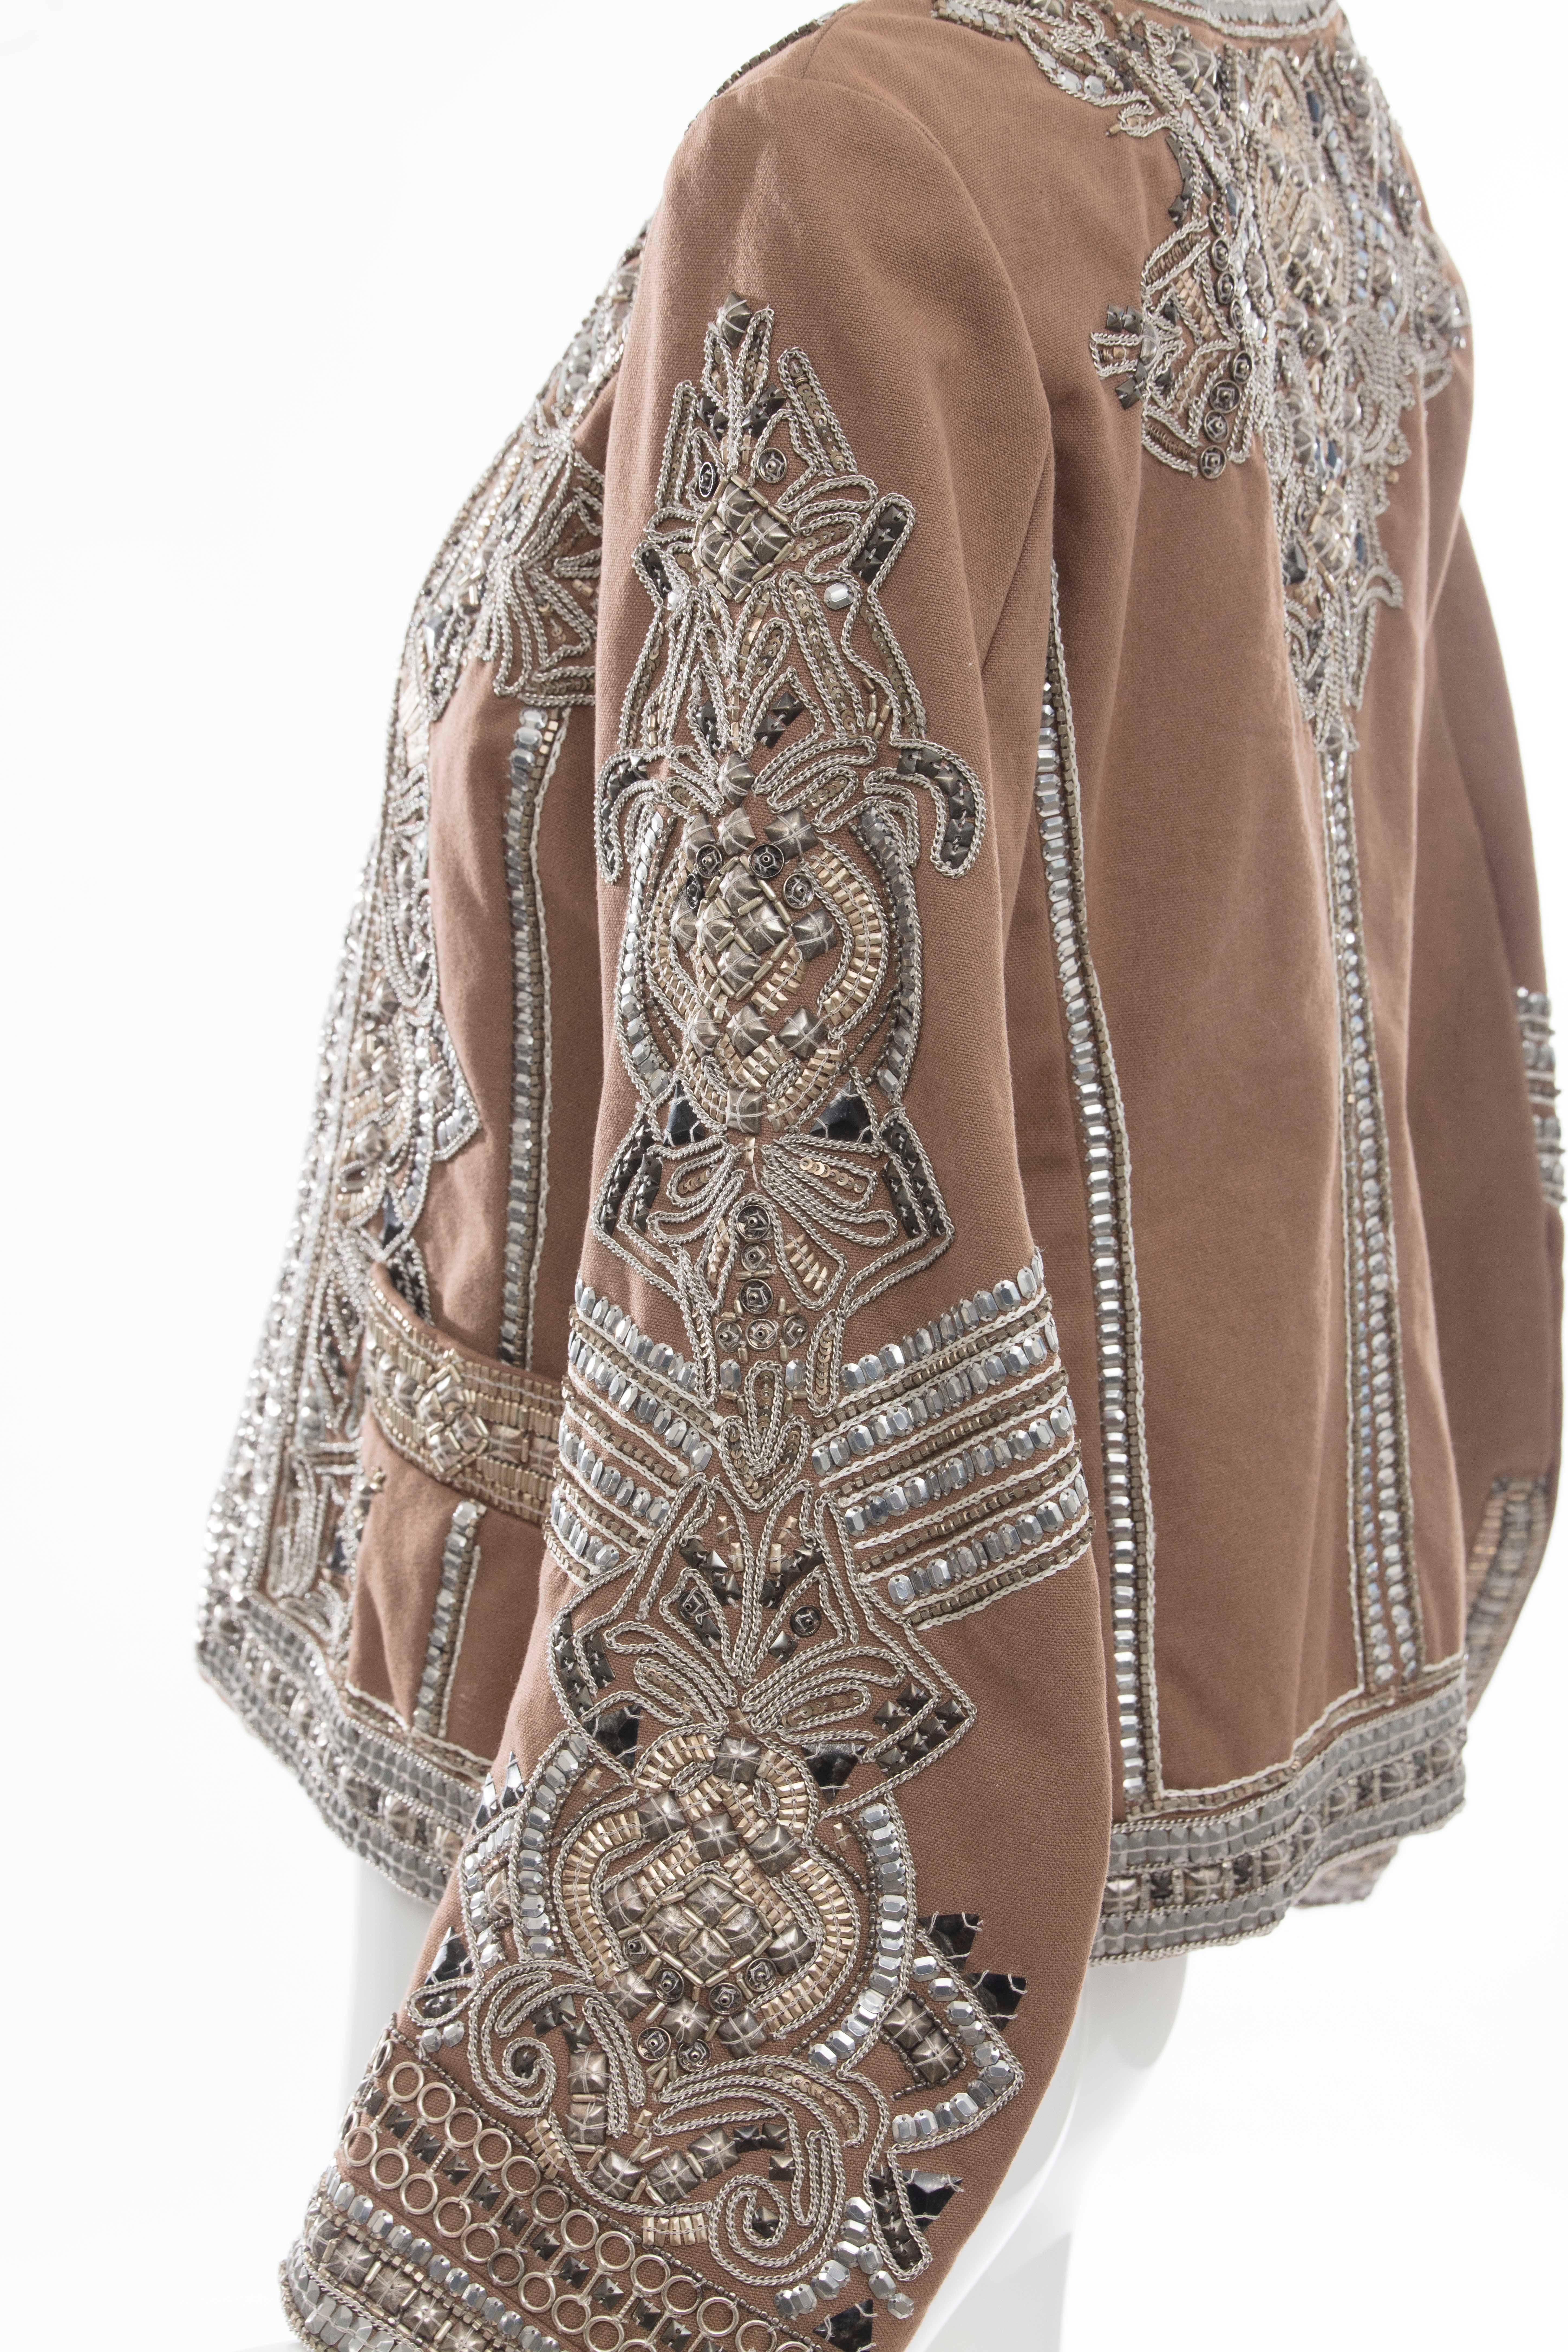 Dries Van Noten Cotton Embroidered Jacket With Silver Indian Thread, Fall 2010 For Sale 1